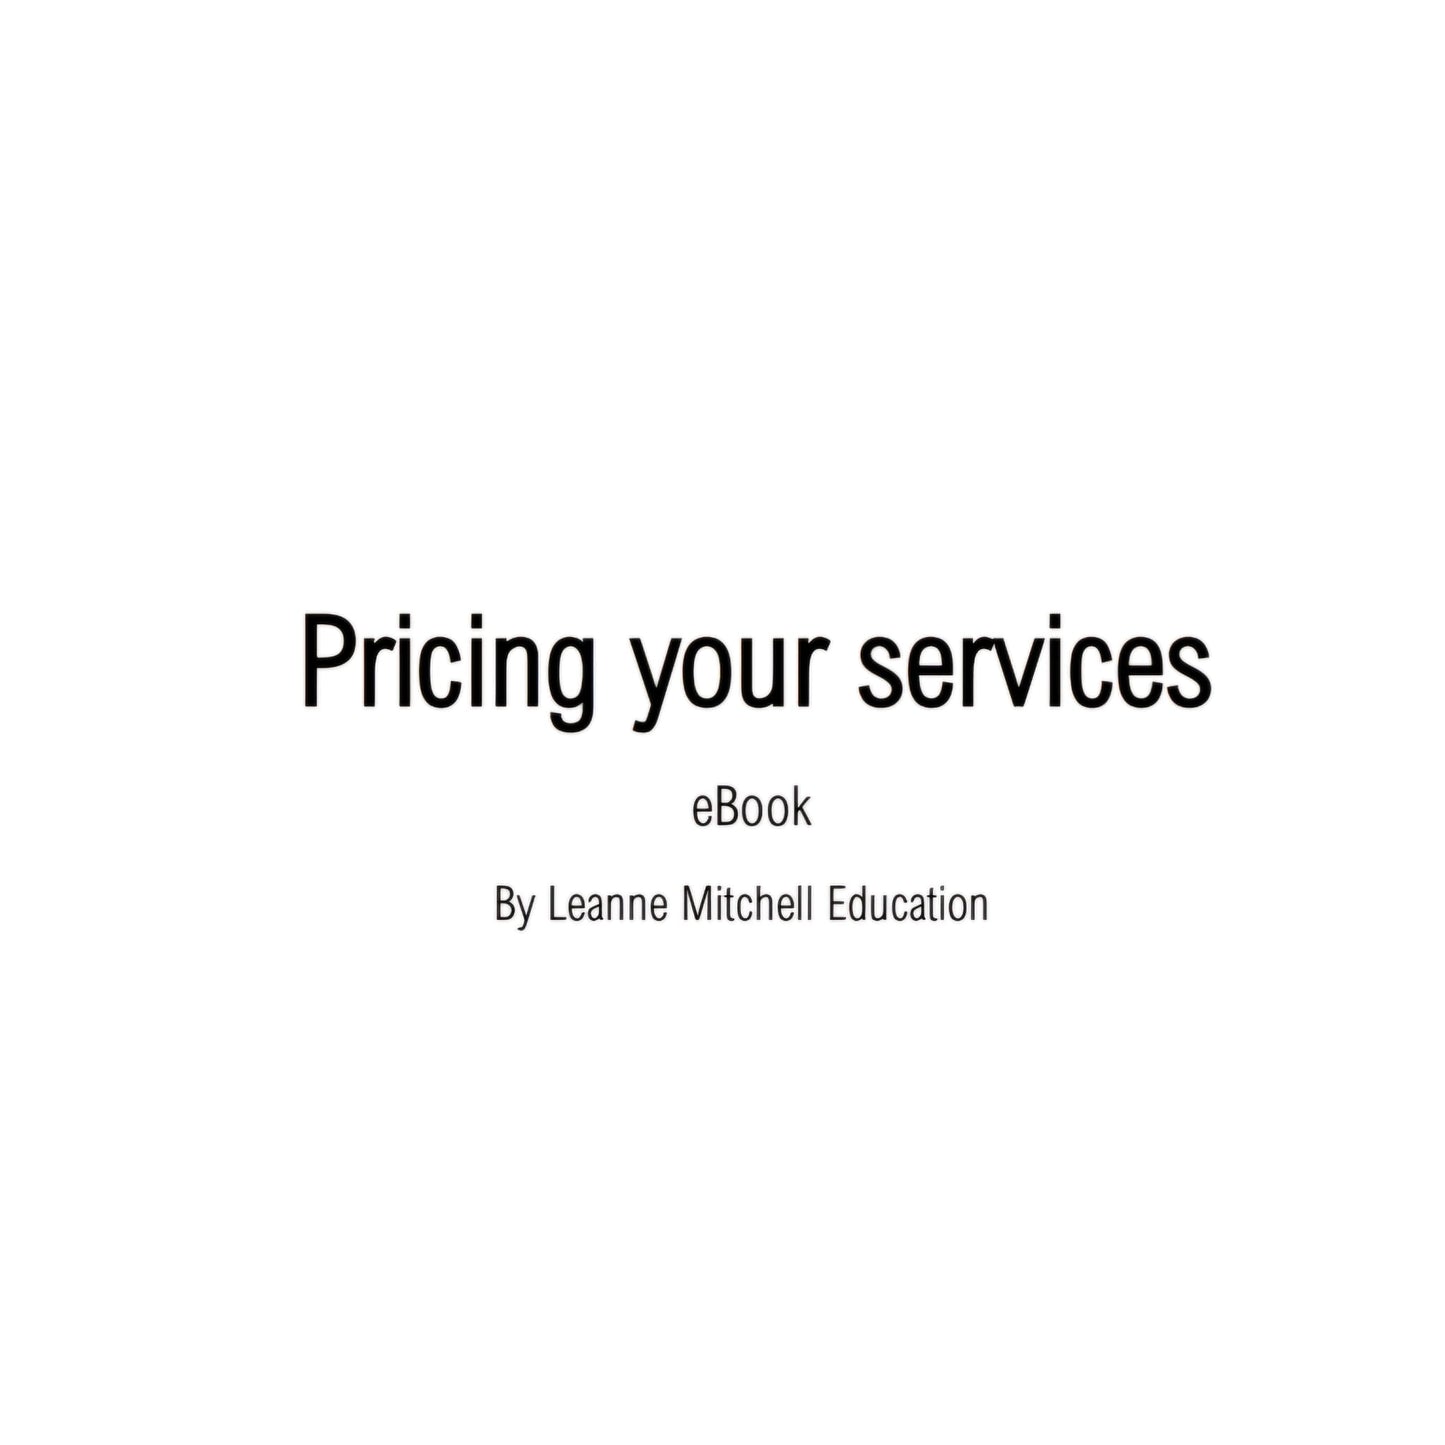 Pricing your services eBook